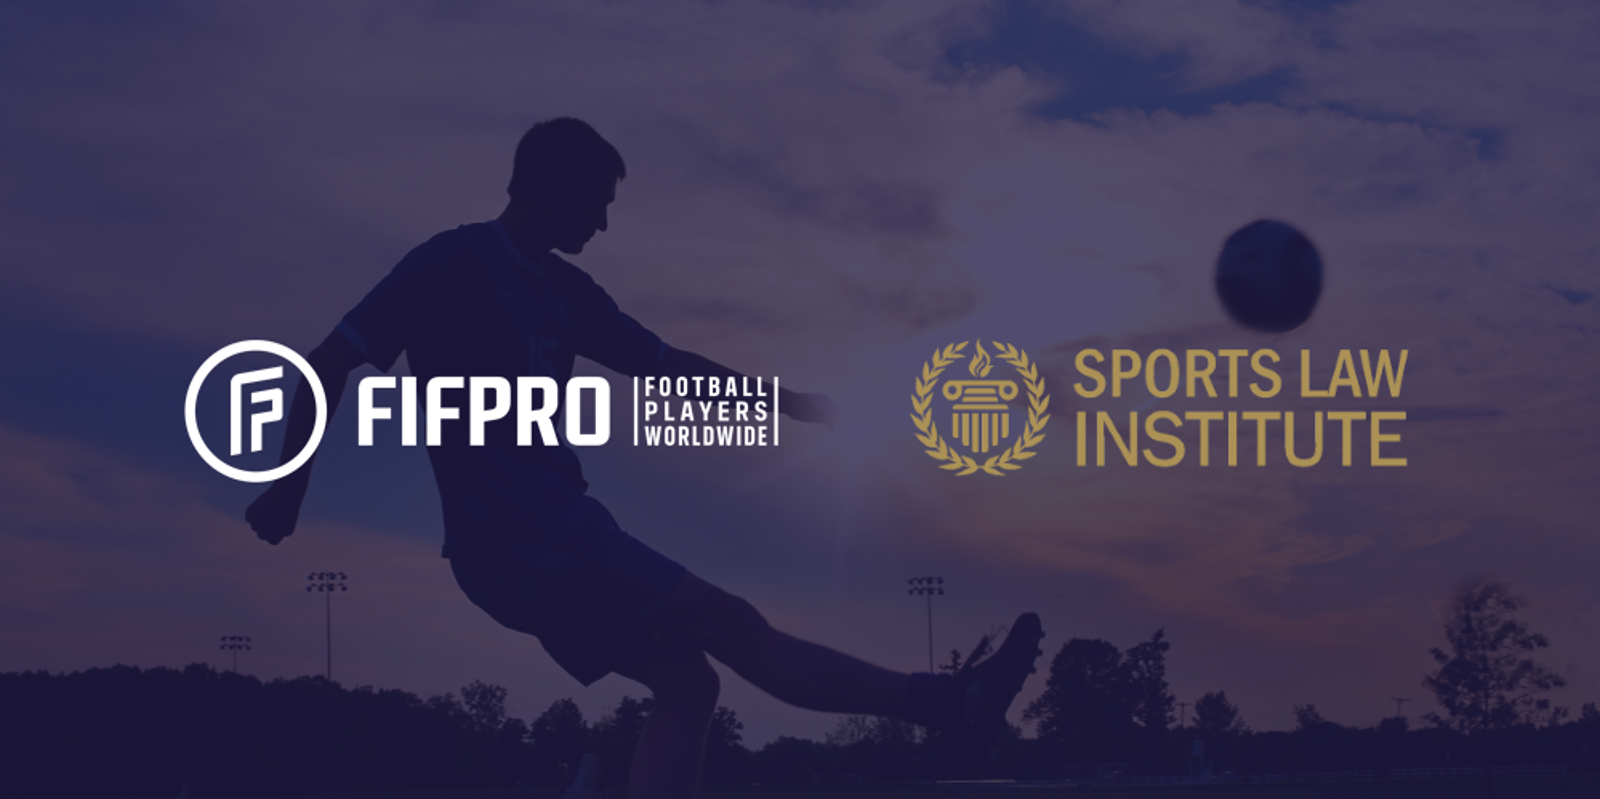 FIFPRO And Sports Law Institute